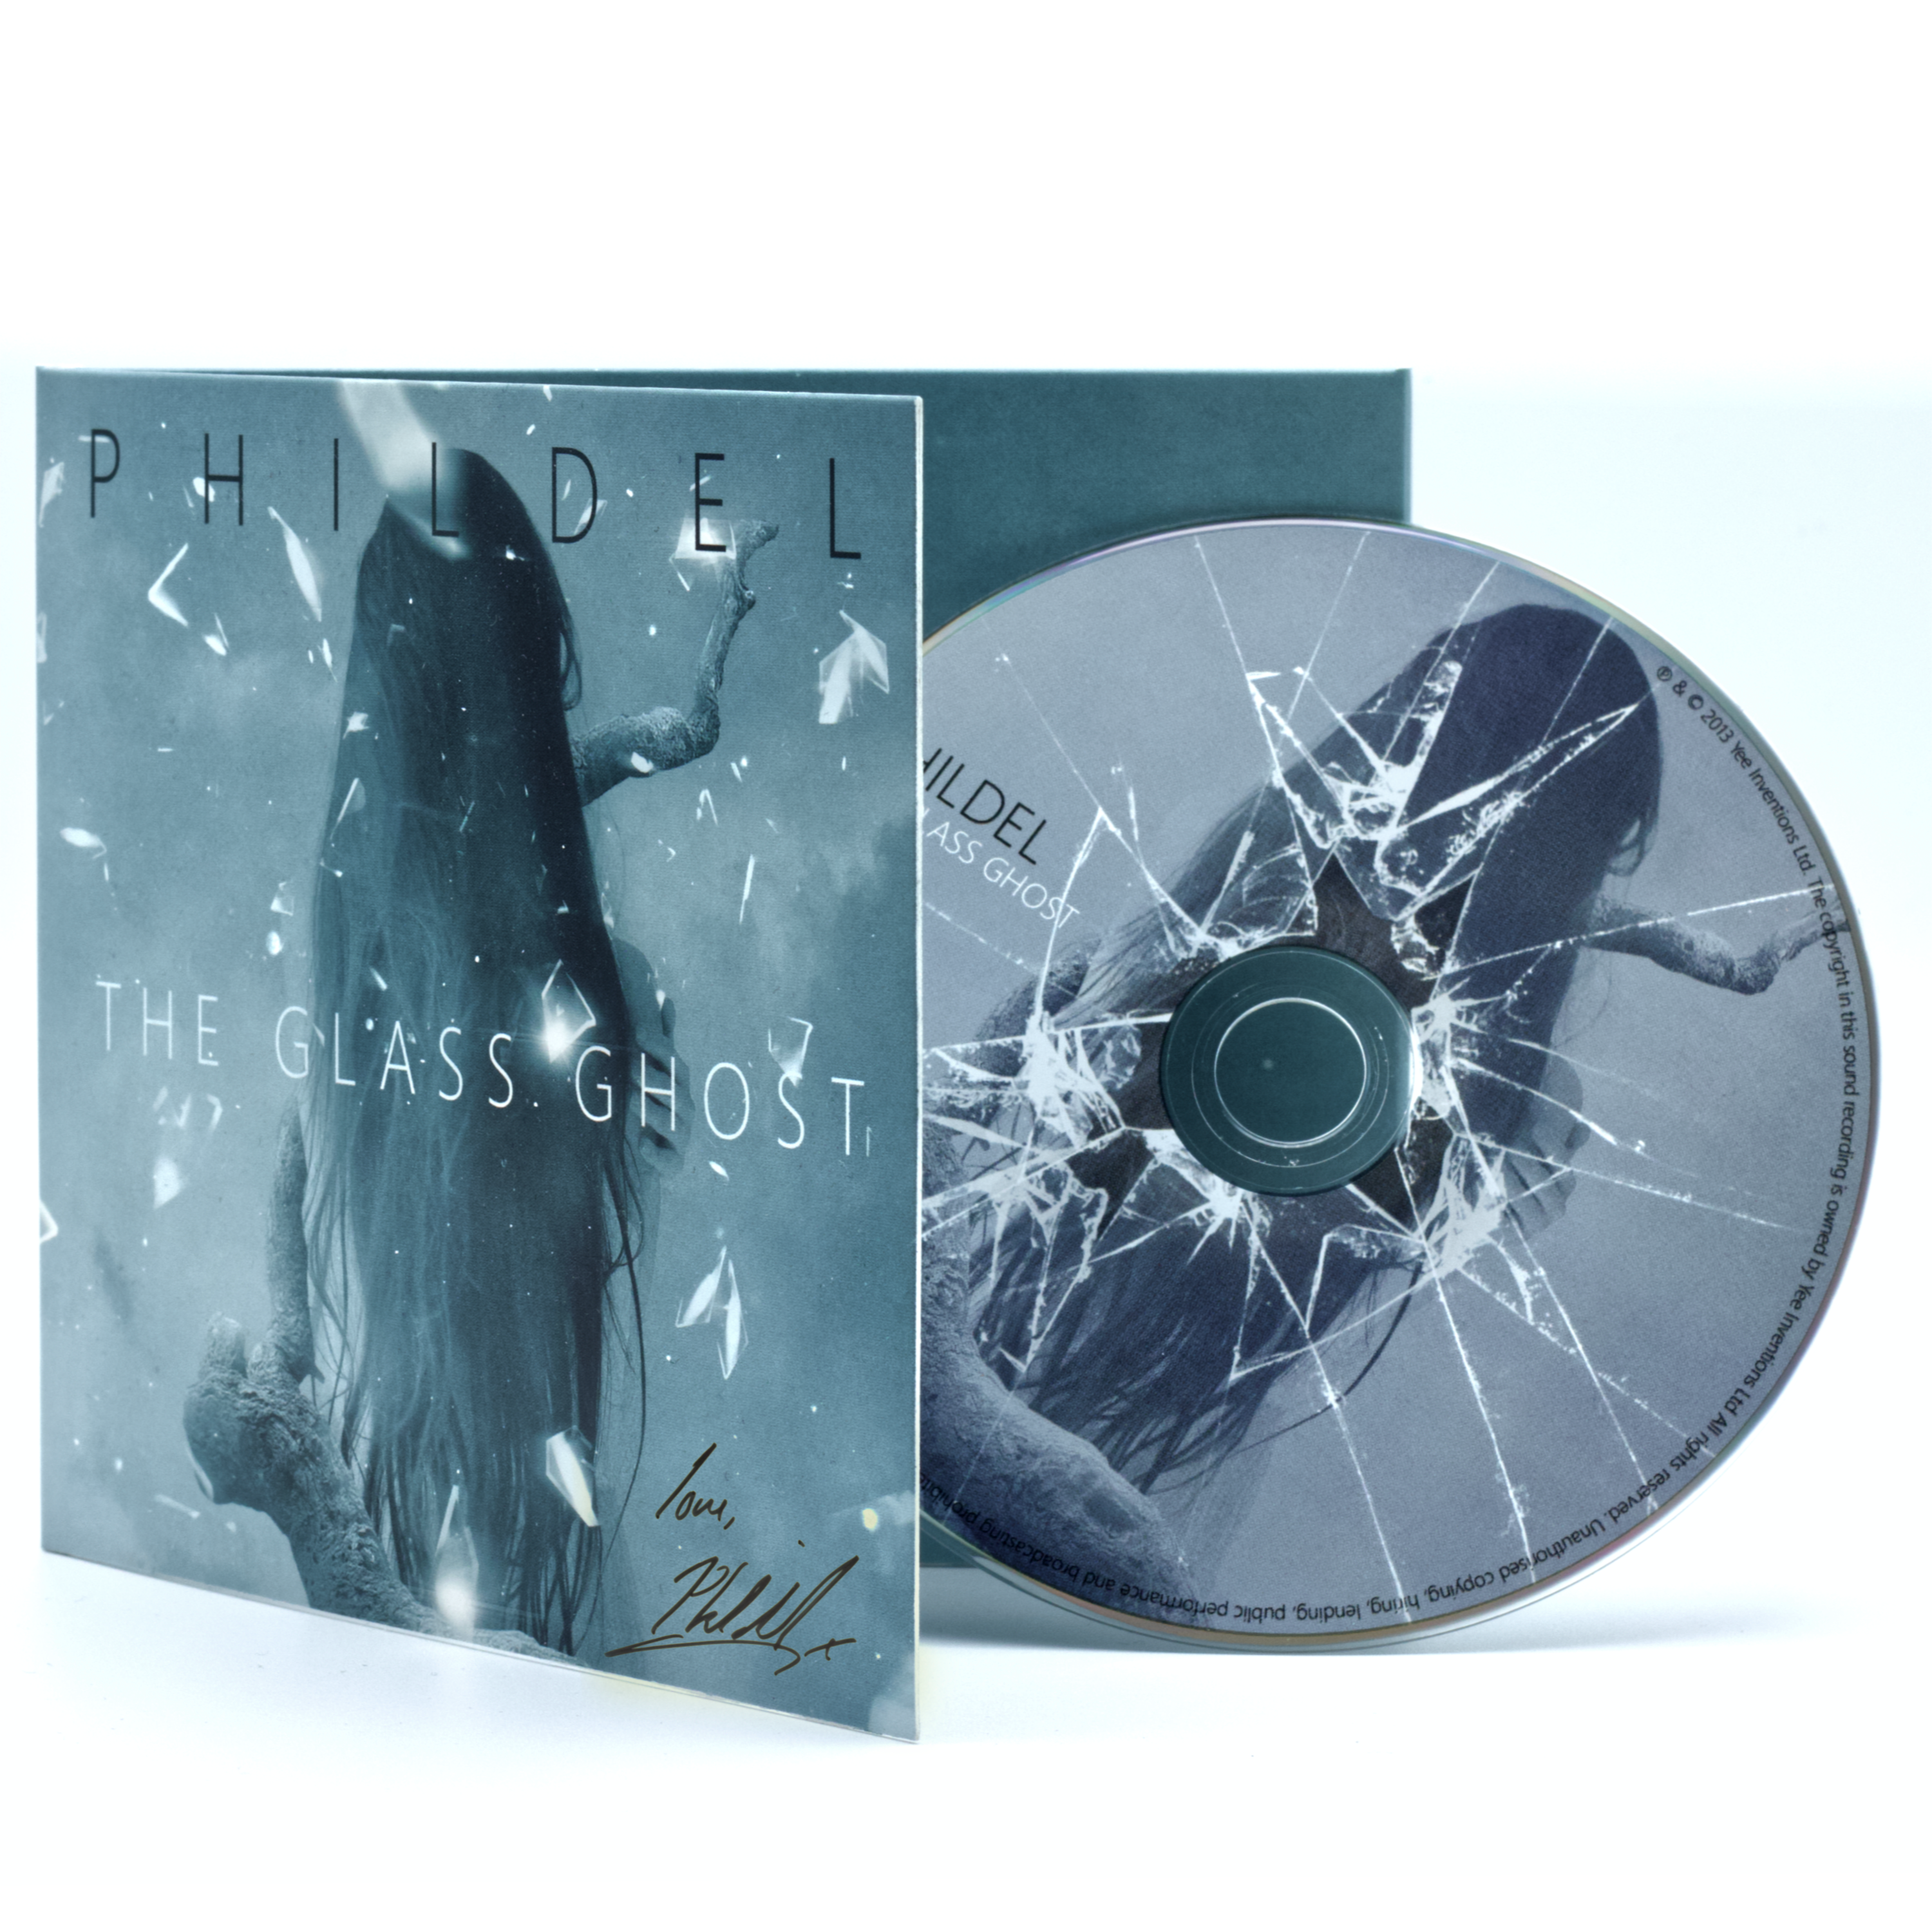 THE GLASS GHOST - PHILDEL Limited Edition Audio CD (SIGNED BY PHILDEL) - PHILDEL